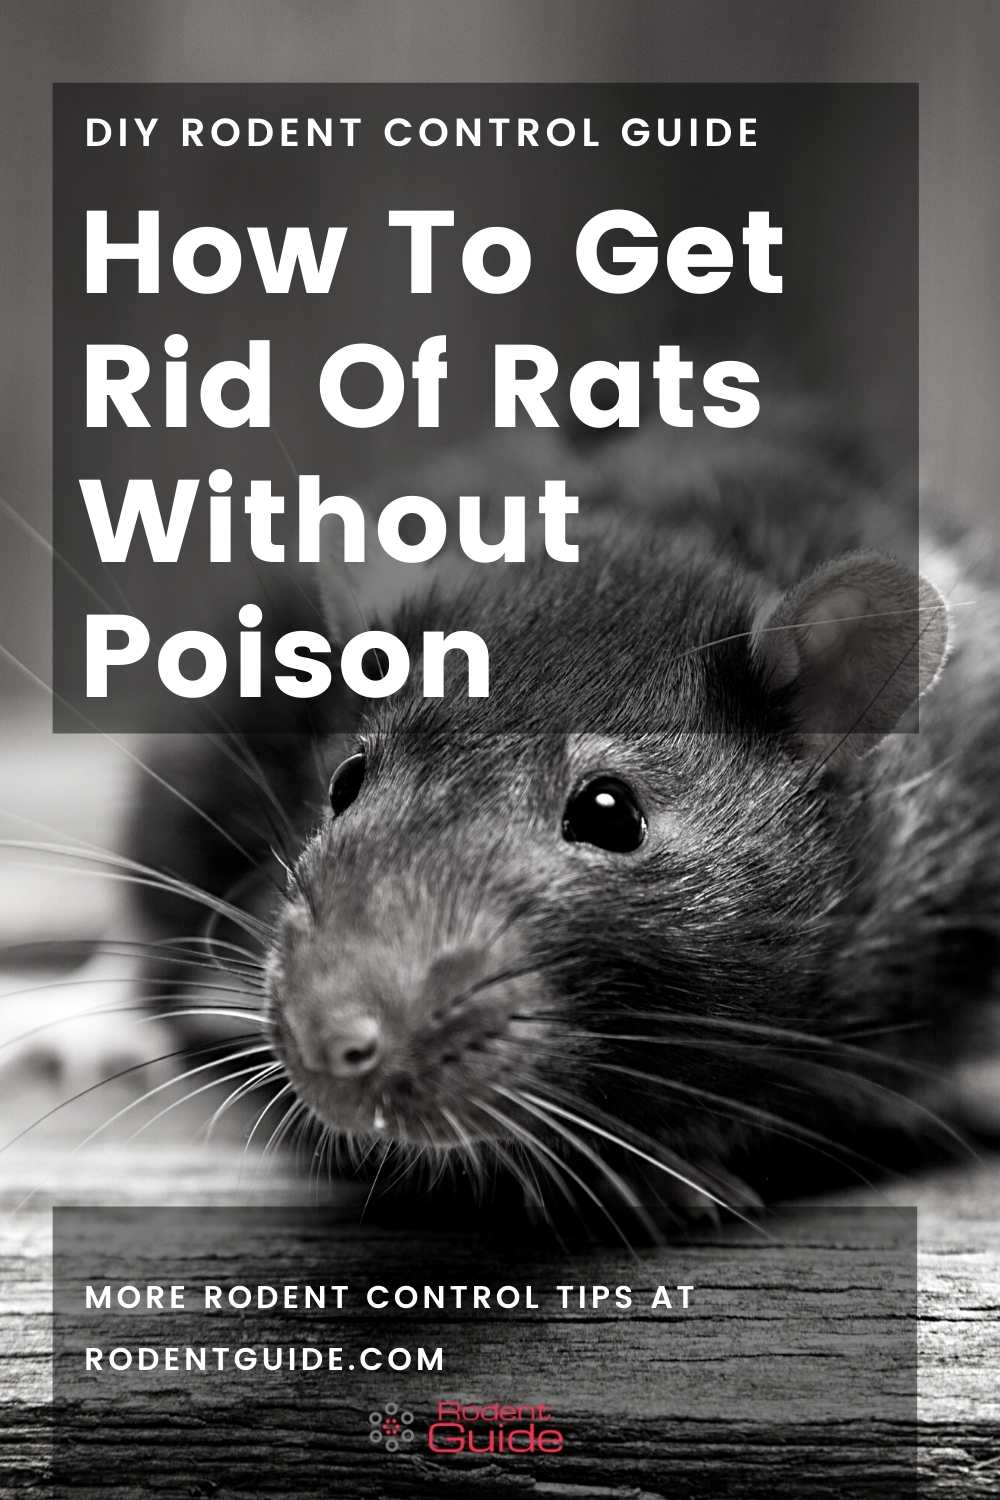 How To Get Rid Of Rats Without Poison - 5 Ways - DIY ...